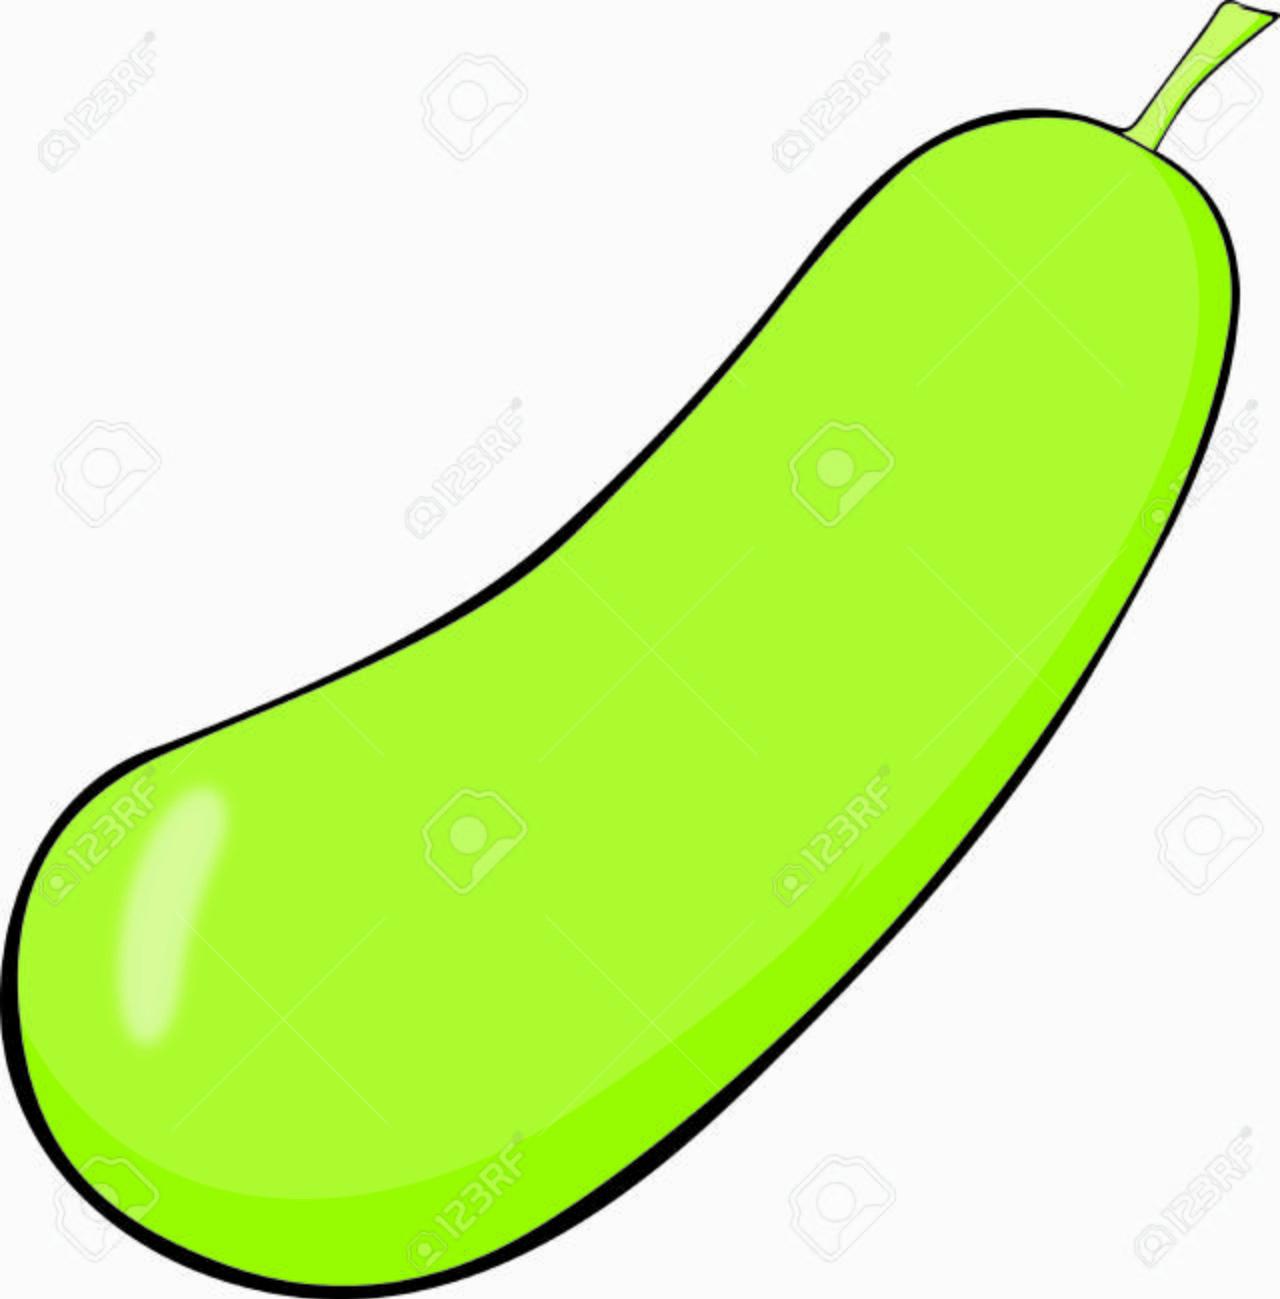 Bottle Gourd Clipart Colorful Design Stock Photo Picture And